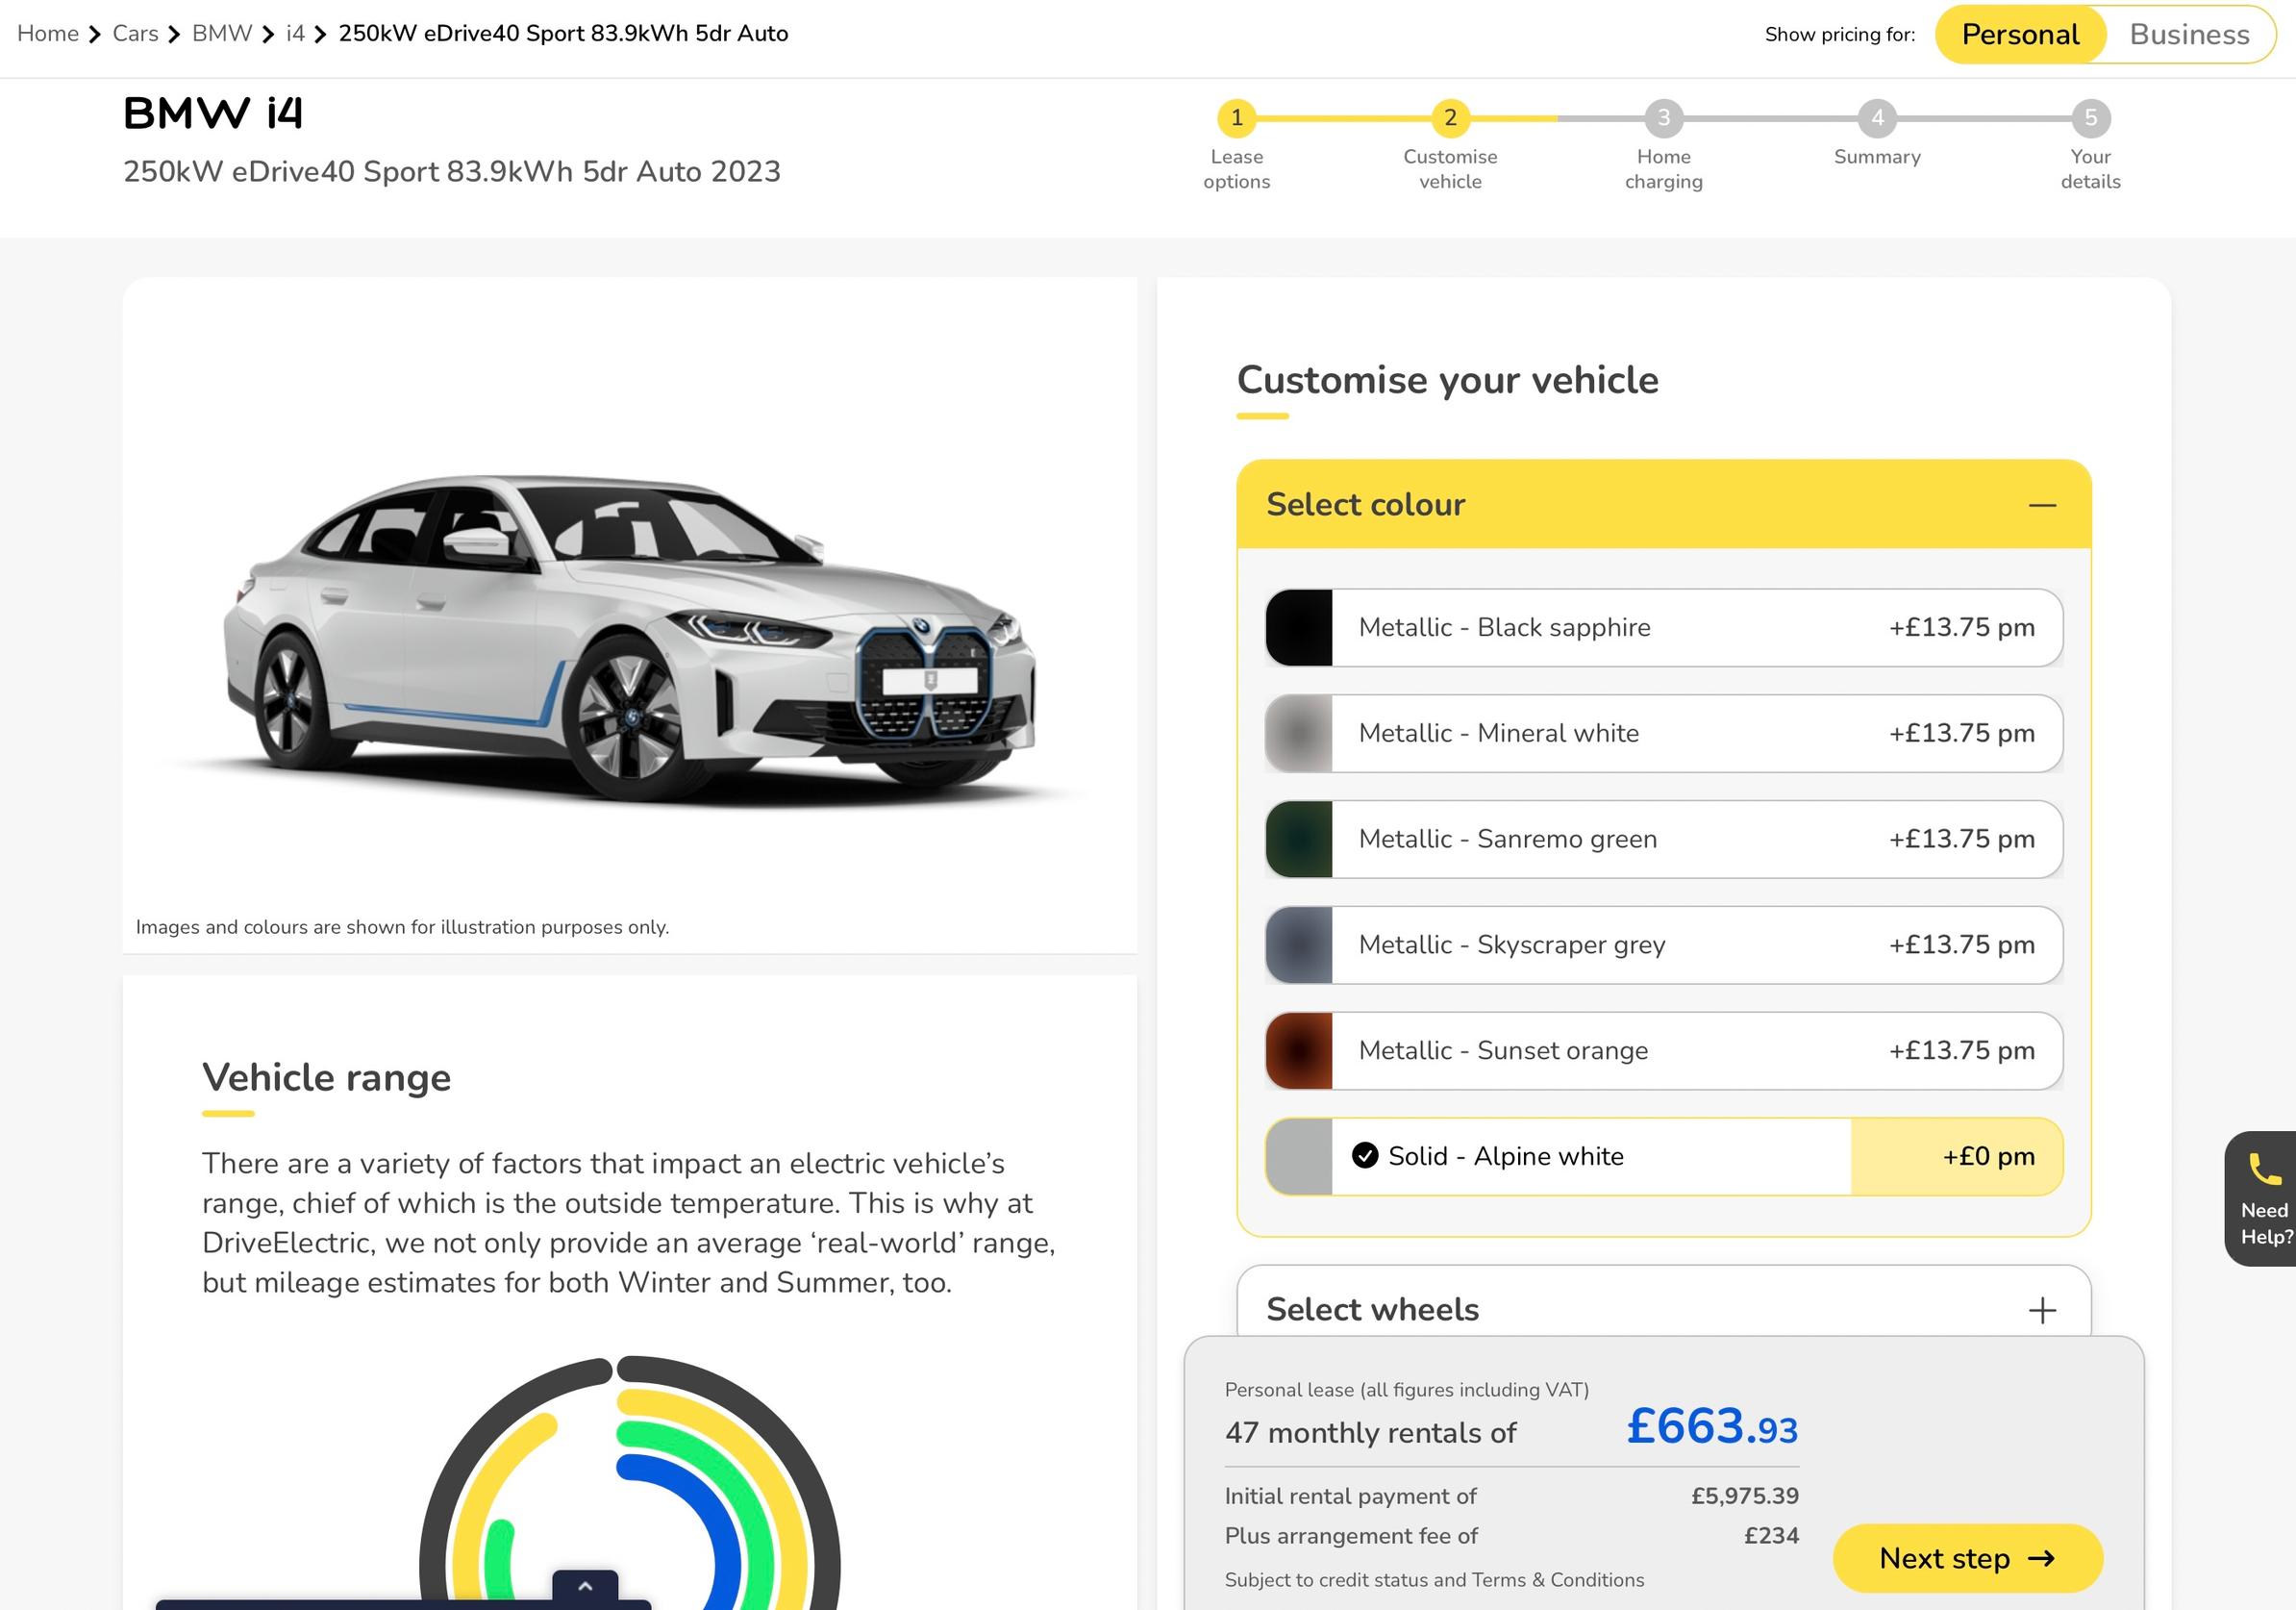 DriveElectric customers can configure cars online